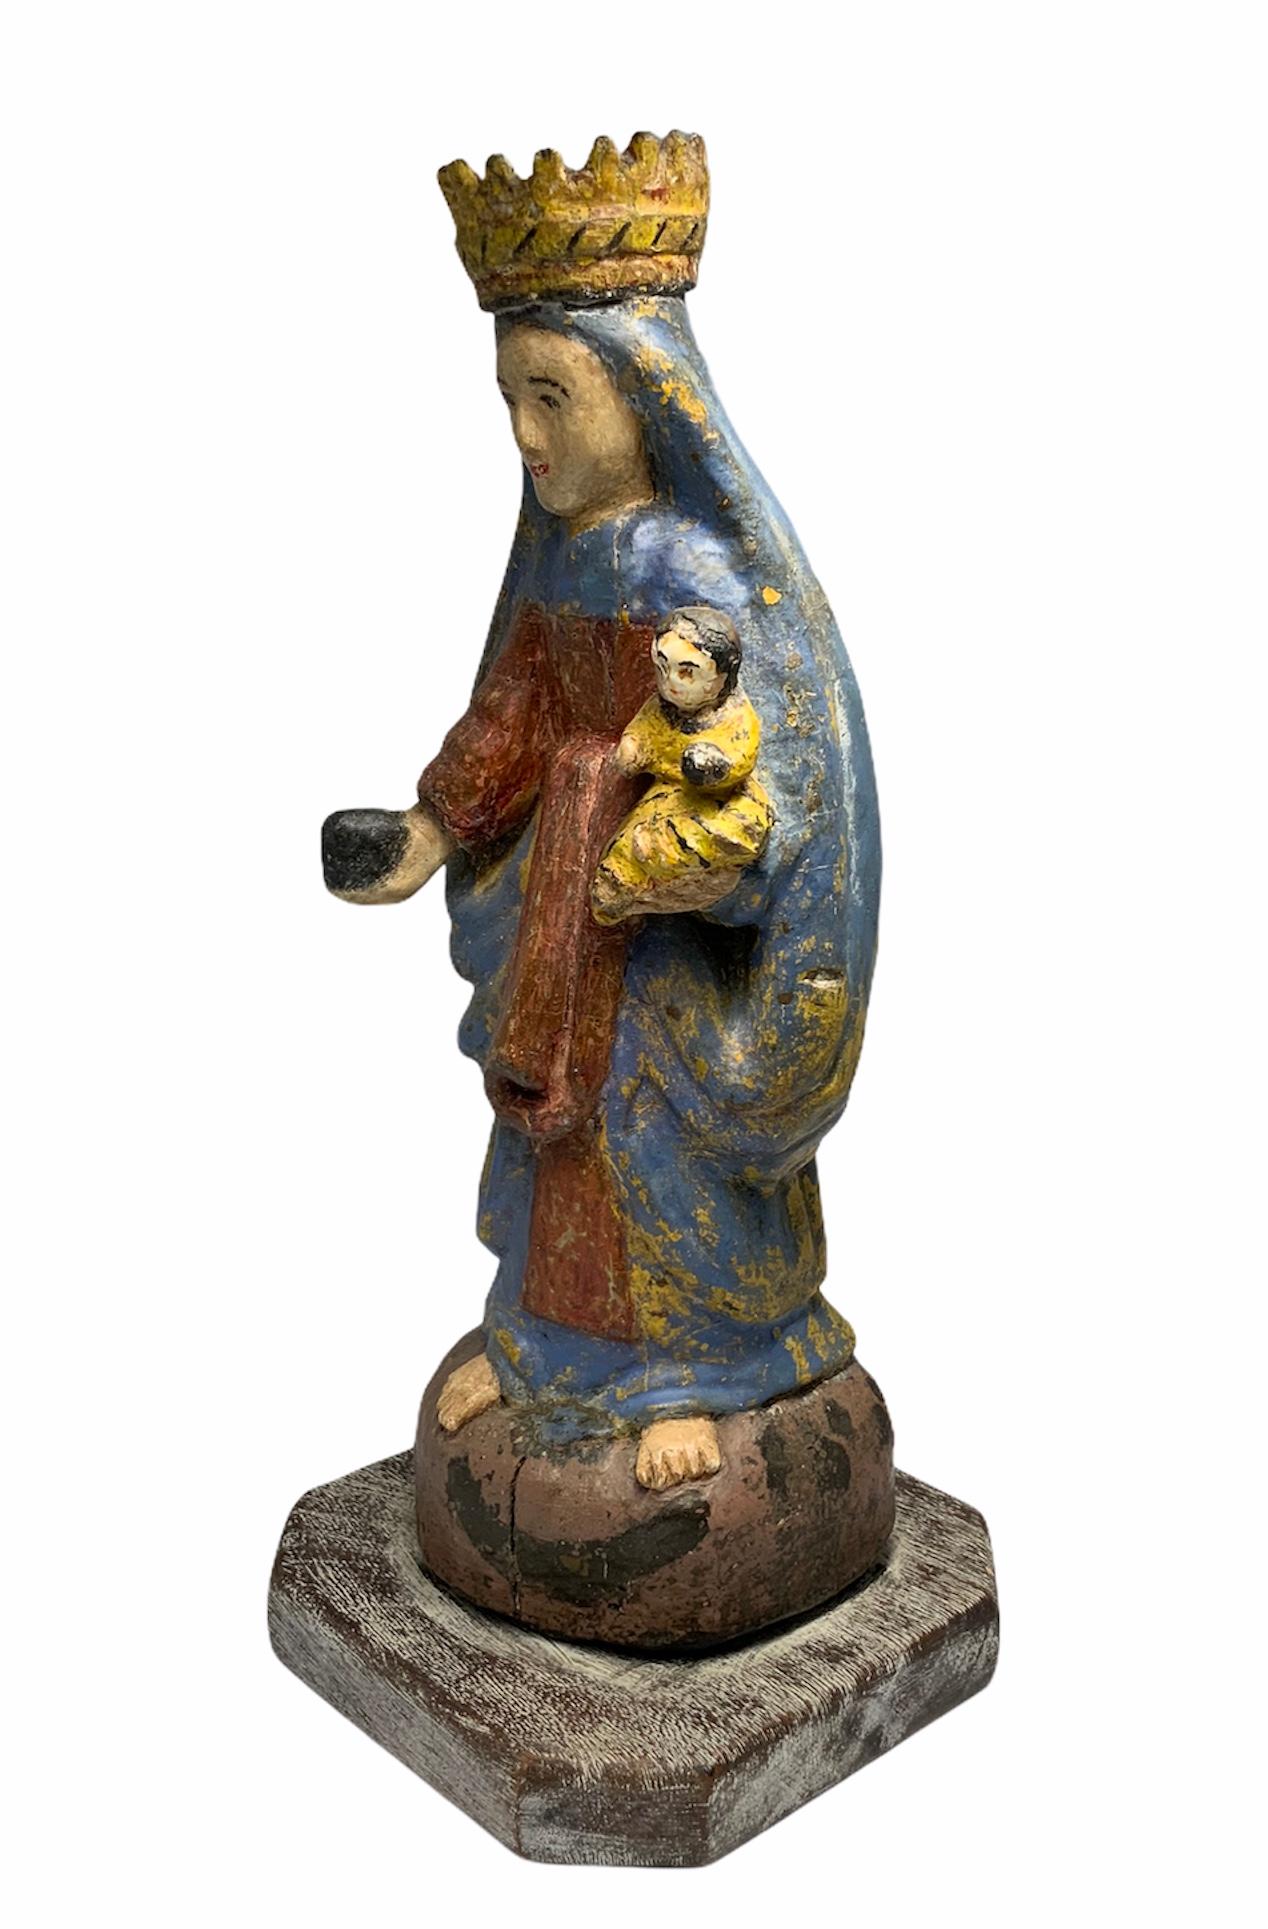 This carved wood colorful sculpture is handmade & painted by an unknown puerto rican craftsman. The Virgen del Carmen is the patron saint of fisherman sailors and seaports. Also, believers request of her to protect their family or pray to her to